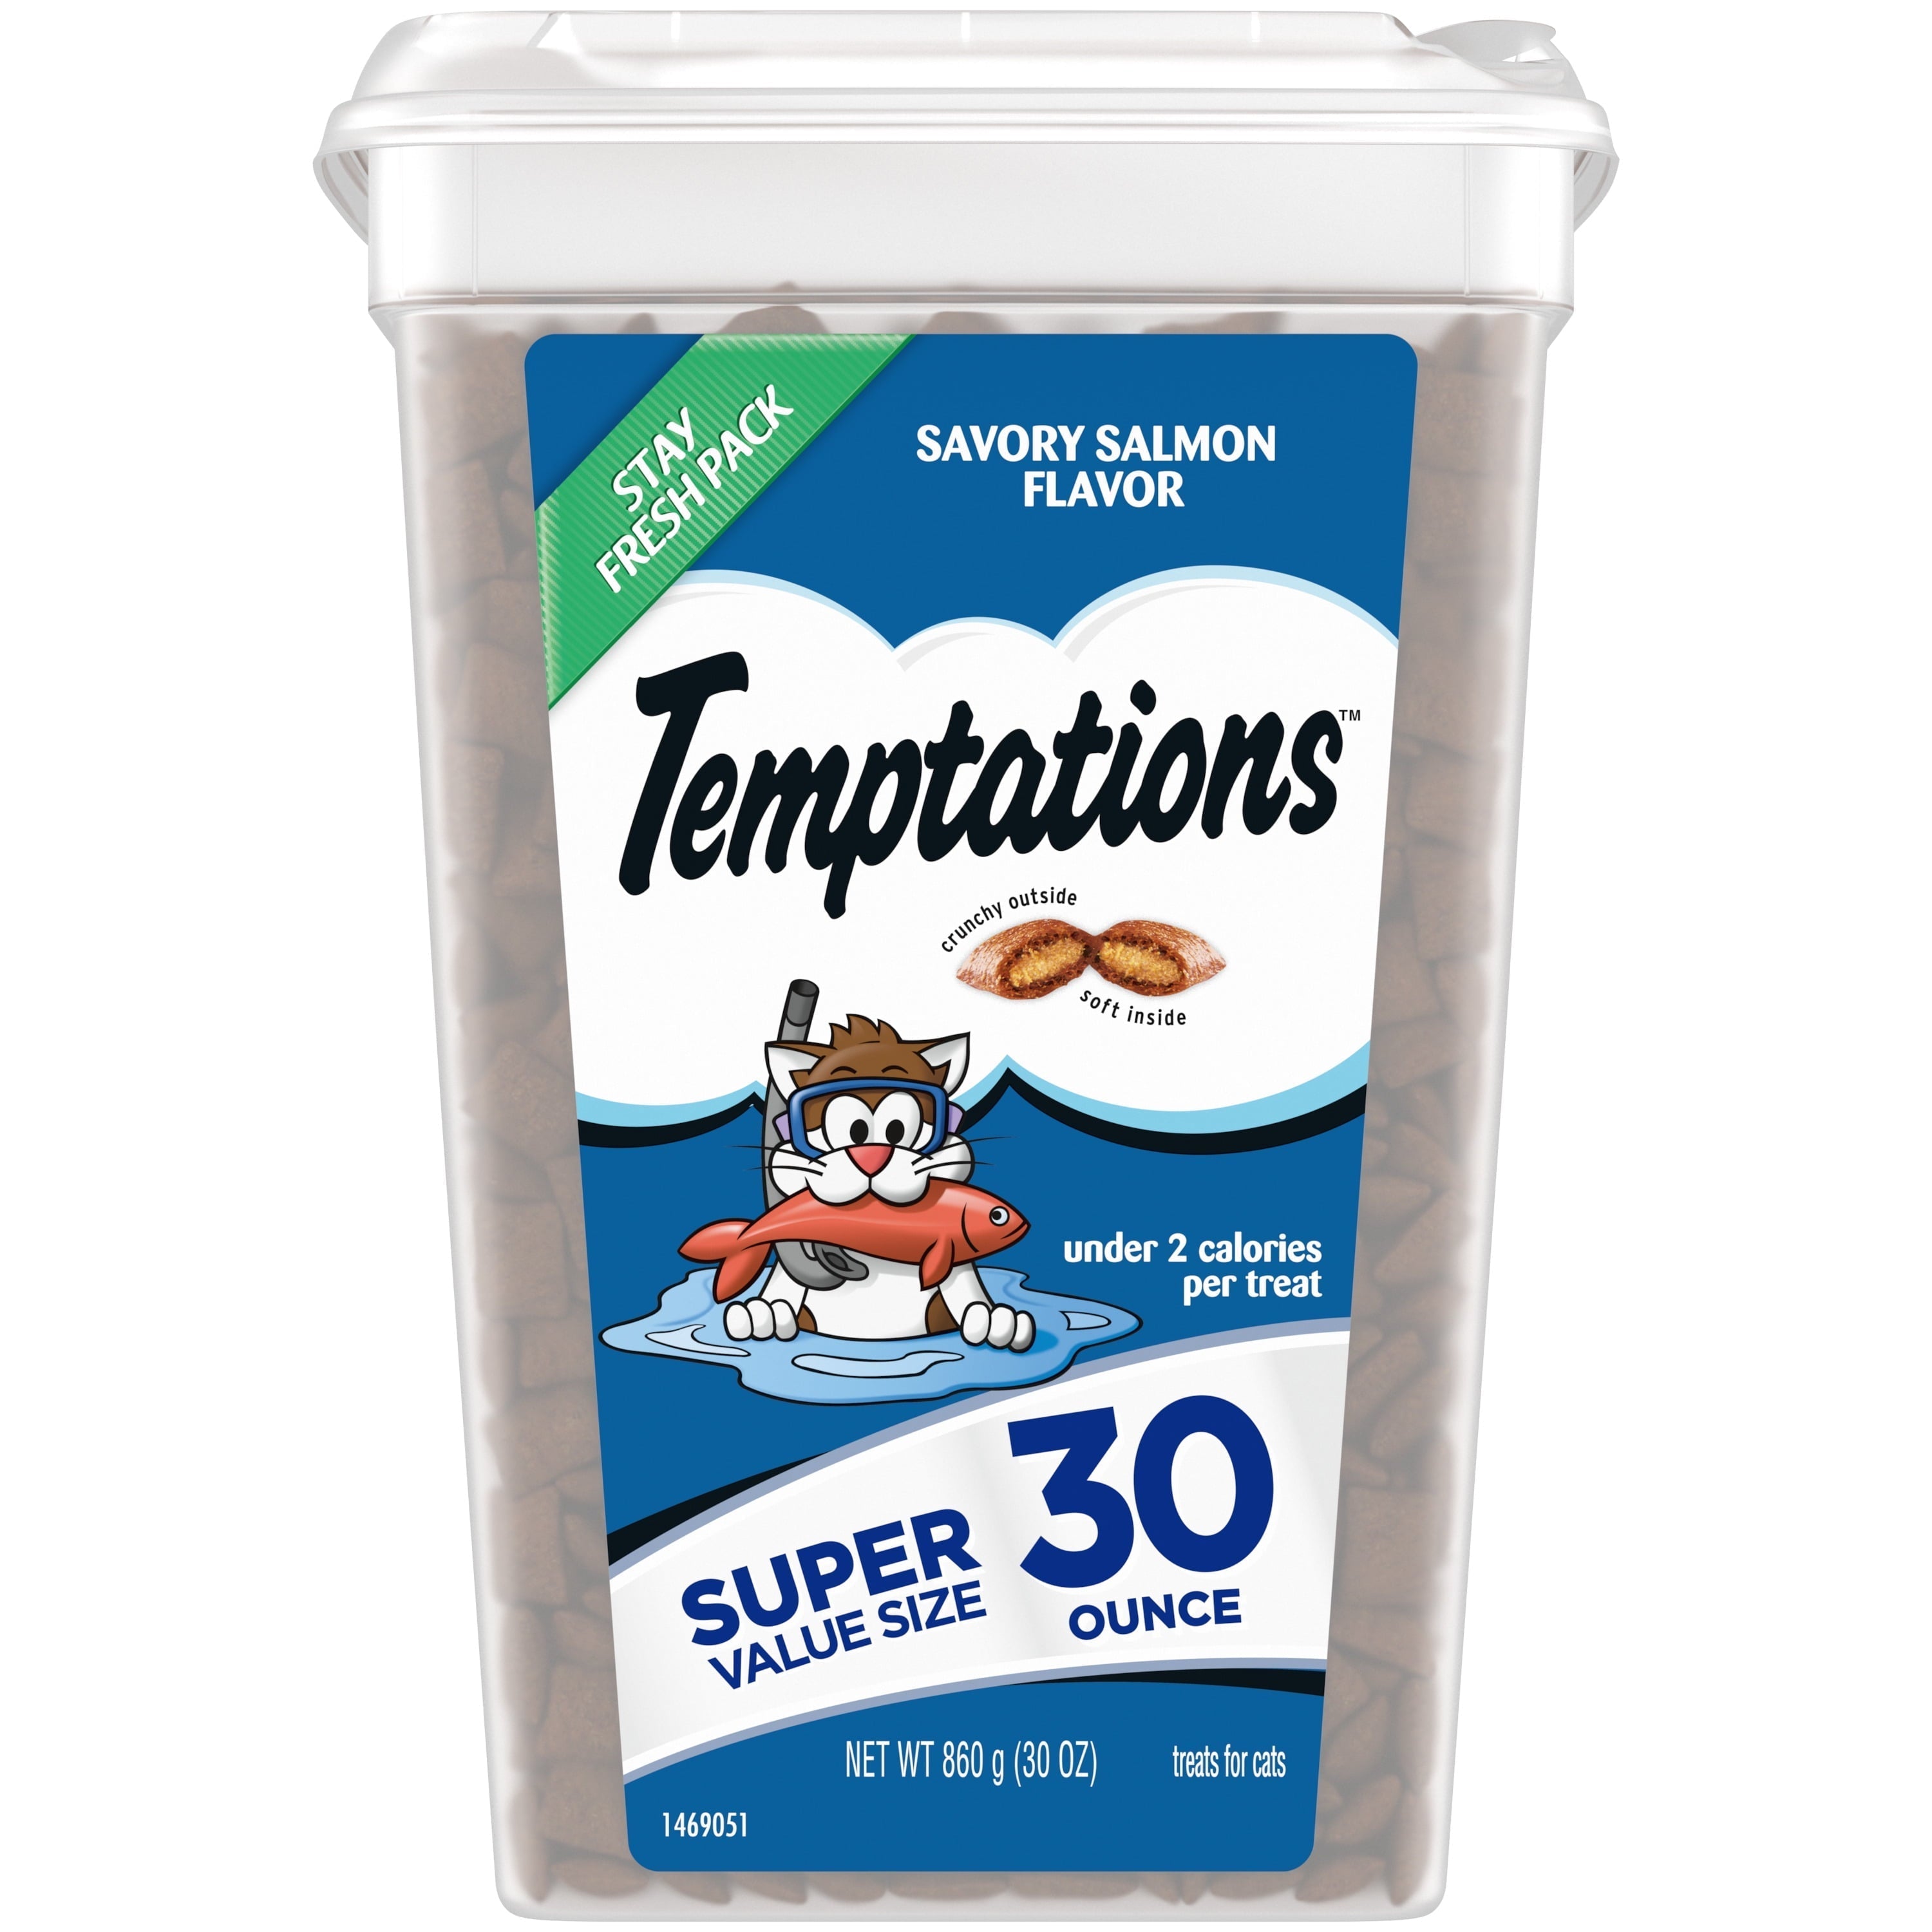 Wholesale prices with free shipping all over United States Temptations Classic Crunchy and Soft Cat Treats Savory Salmon Flavor, 30 oz. Tub - Steven Deals